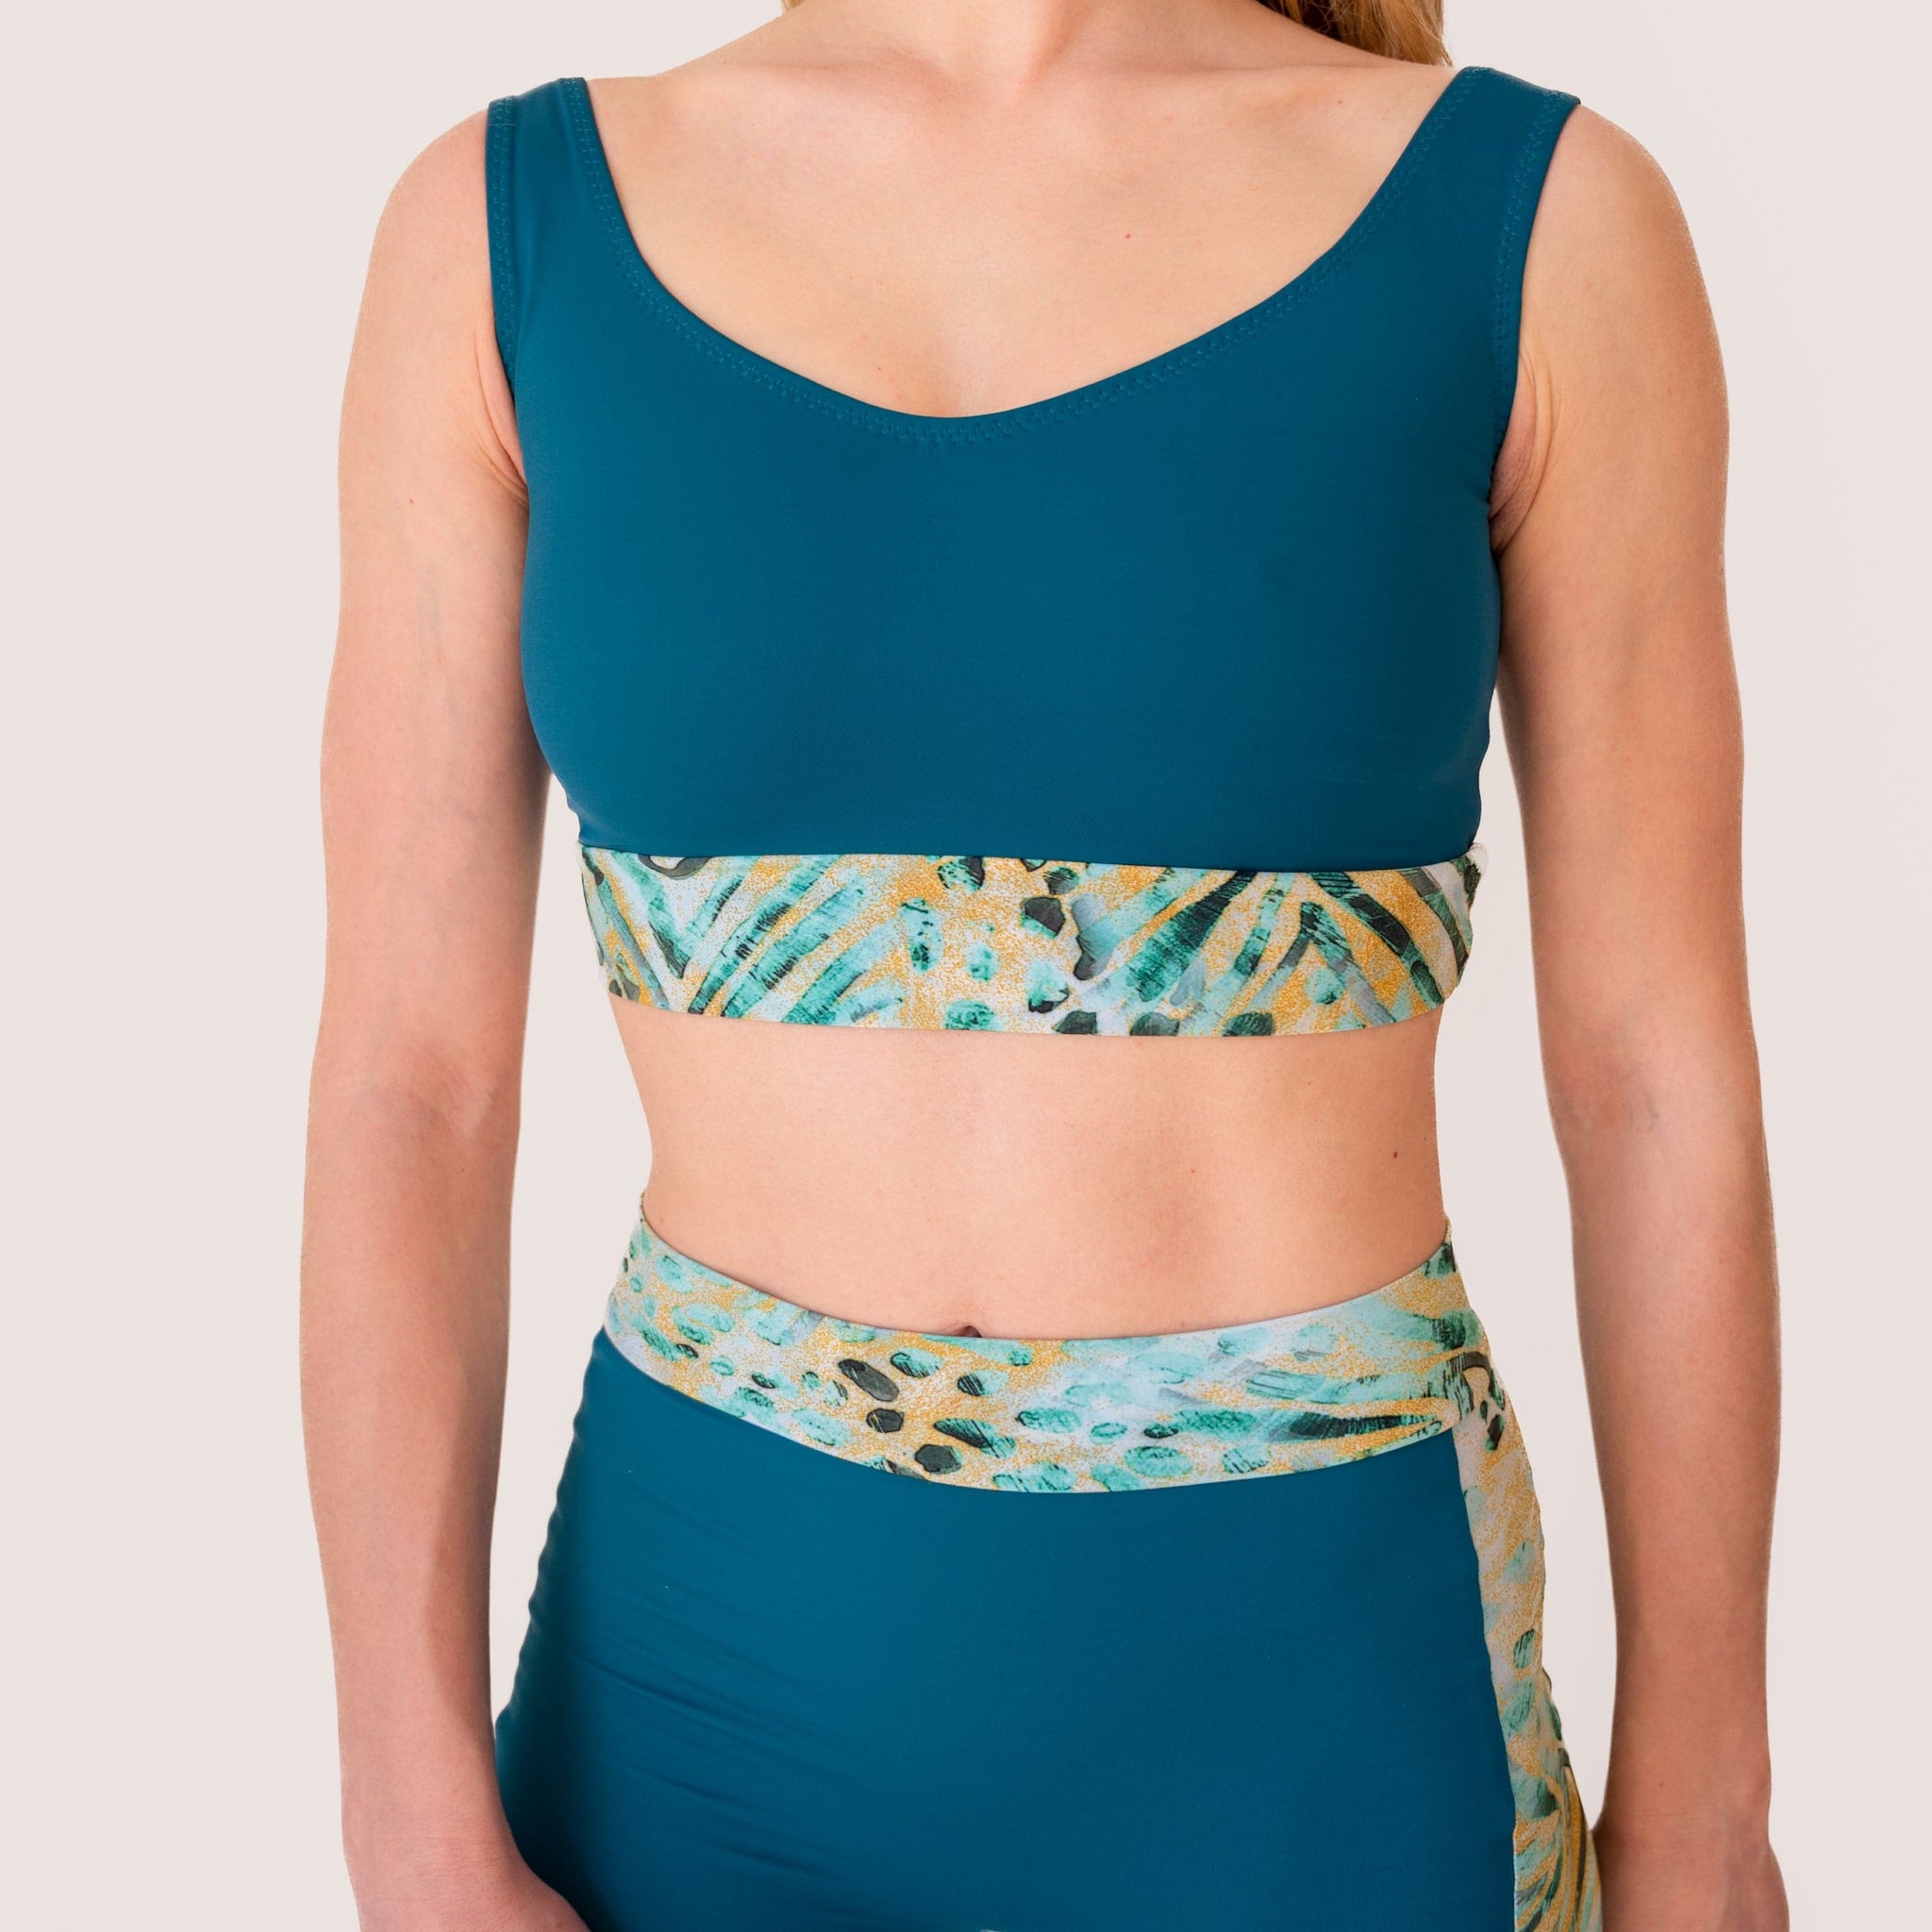 Women's Petrol Bralette for Fitness and Yoga Workout by LENA Activewear